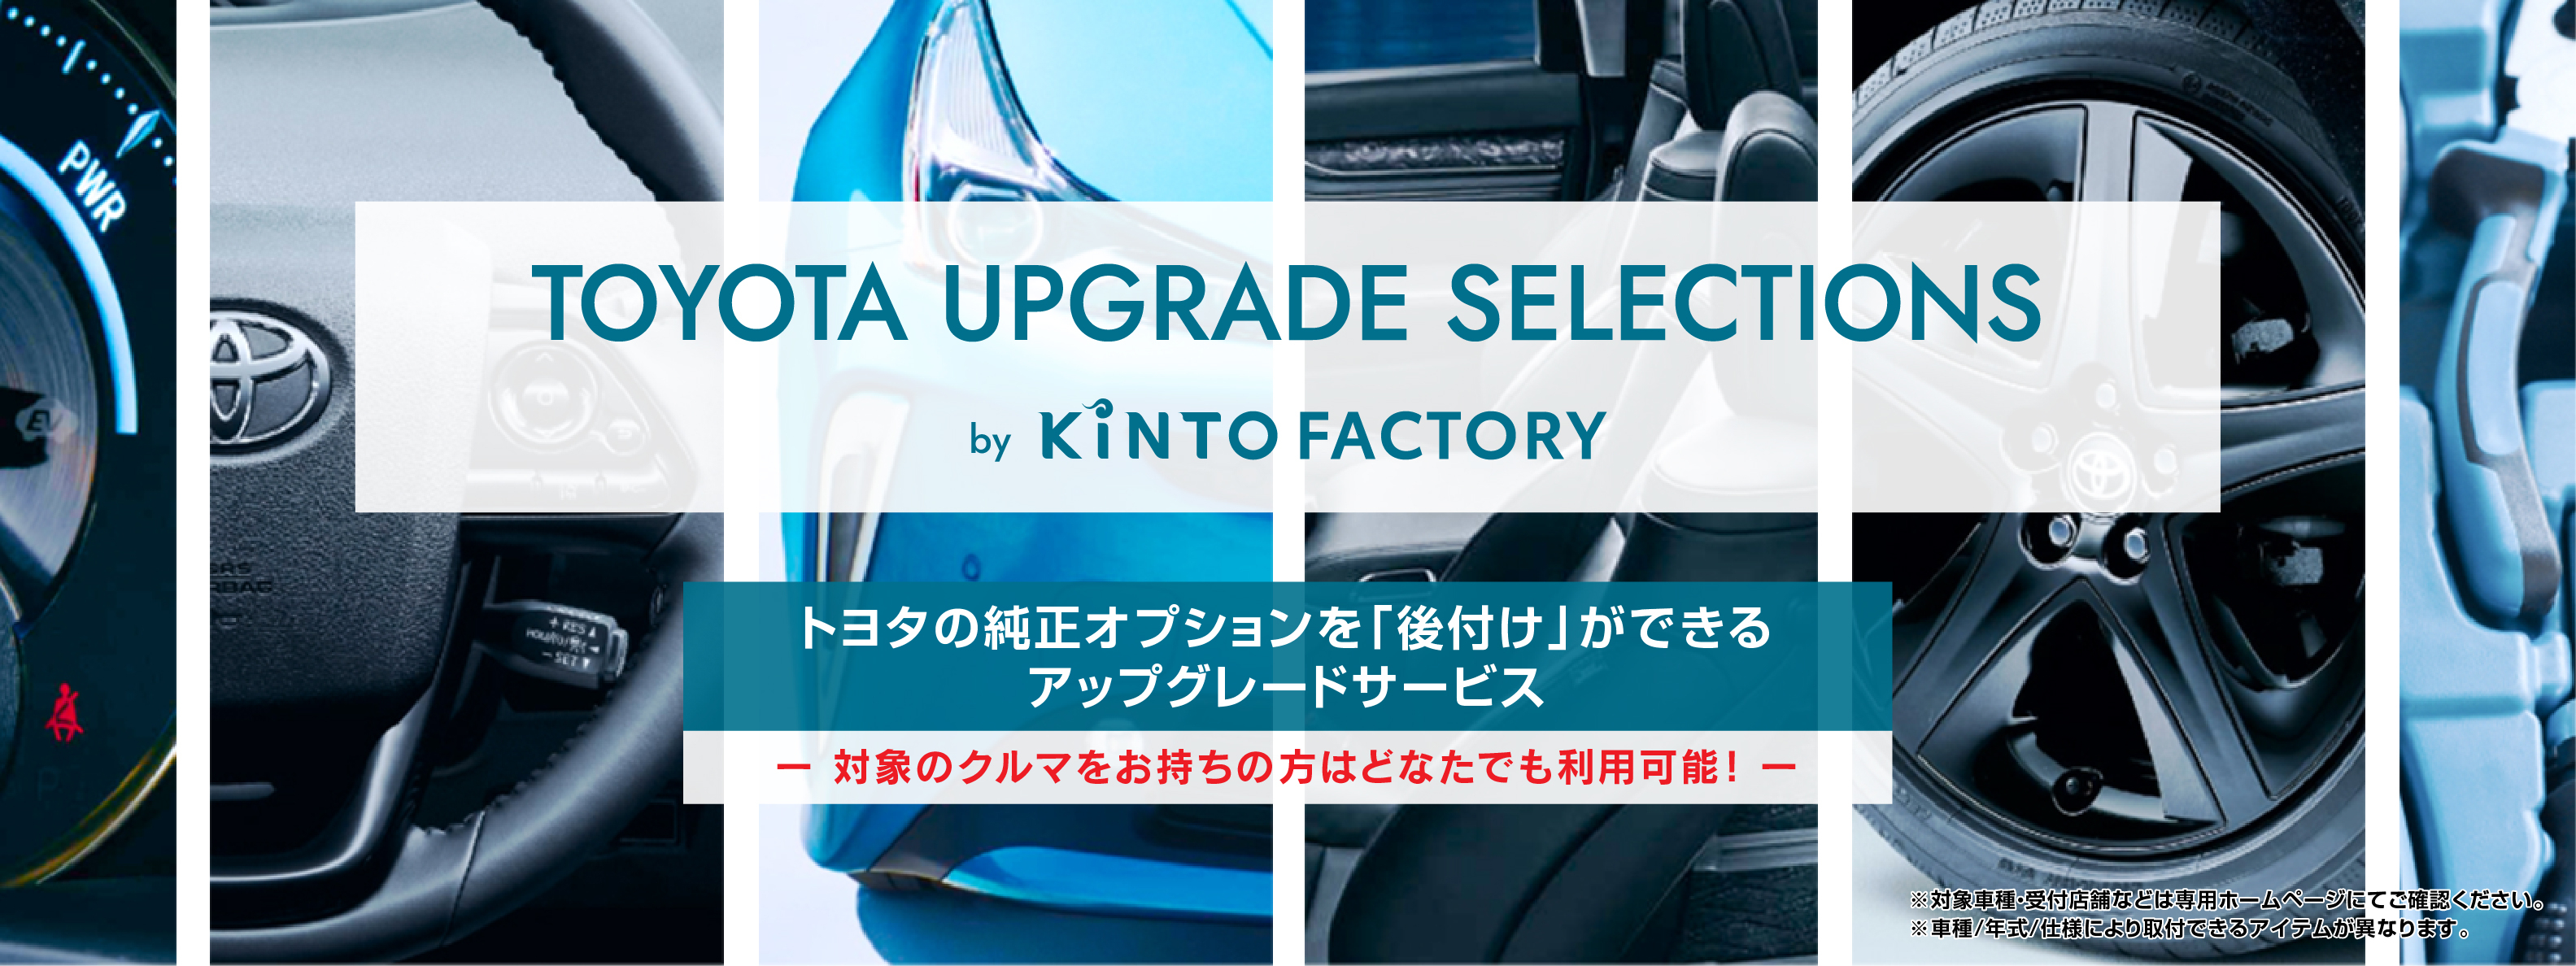 TOYOTA UPGRADE SELECTIONS